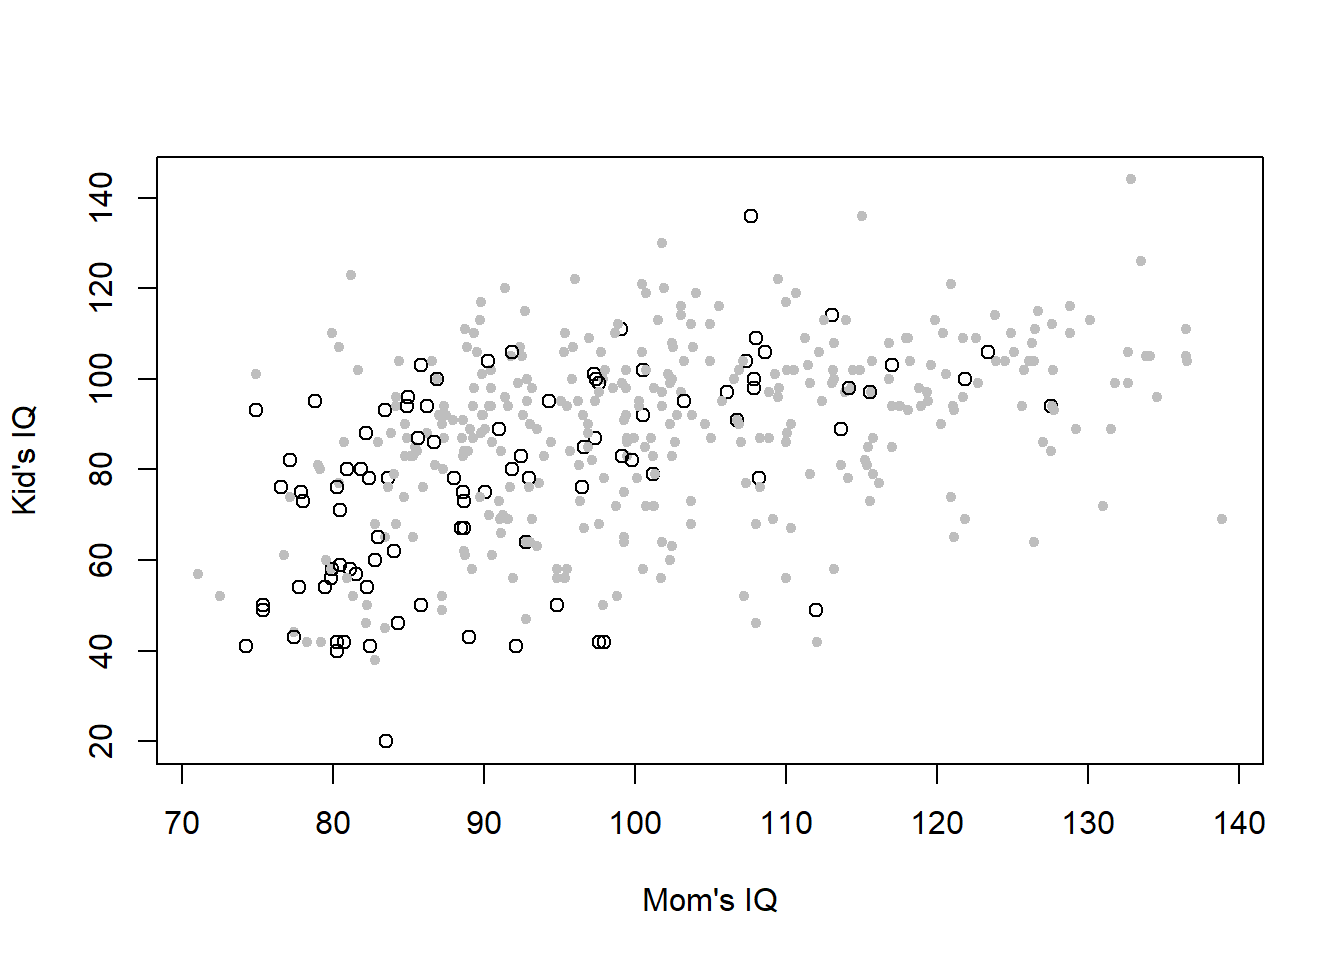 Childrens' IQ score against their mothers' IQ score, with symbol and shading indicating whether or not the mothers have a high school degree (open black dots: no high school degree; closed grey dots: highschool degree). Data from: @gelman2020